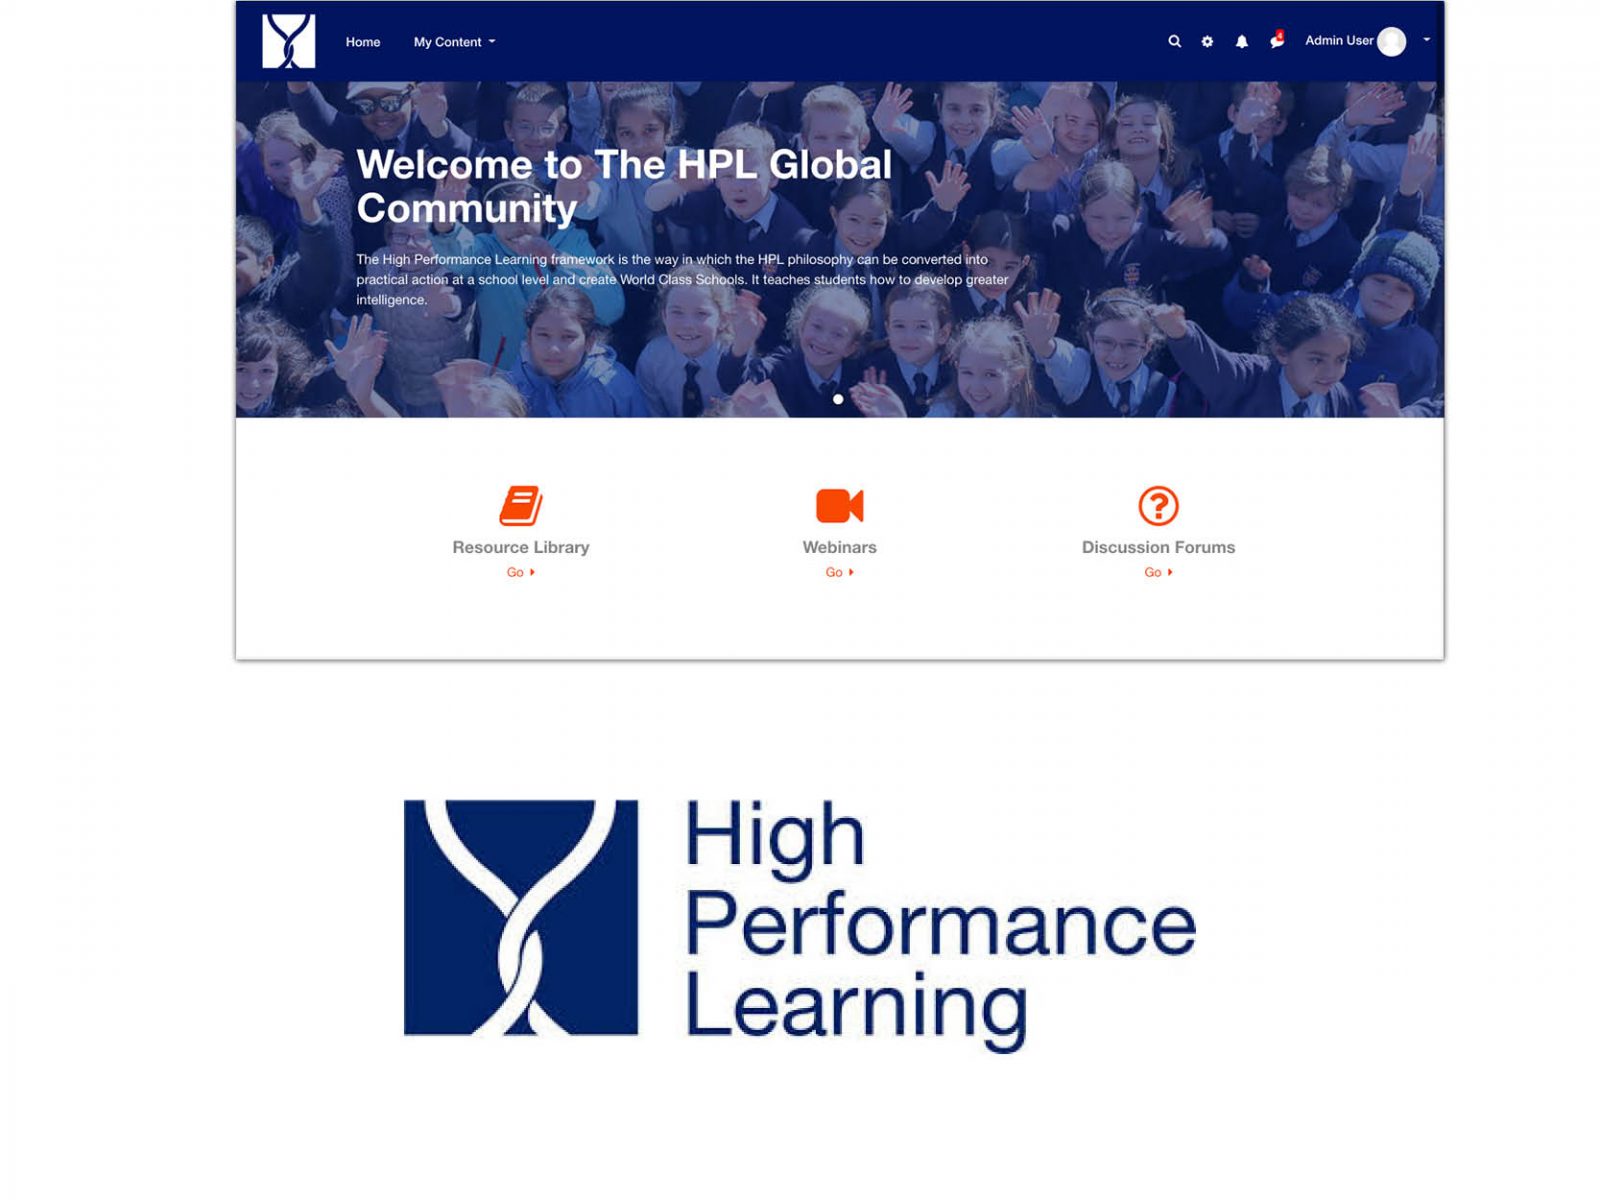 High Performance Learning - Titus Moodle Client